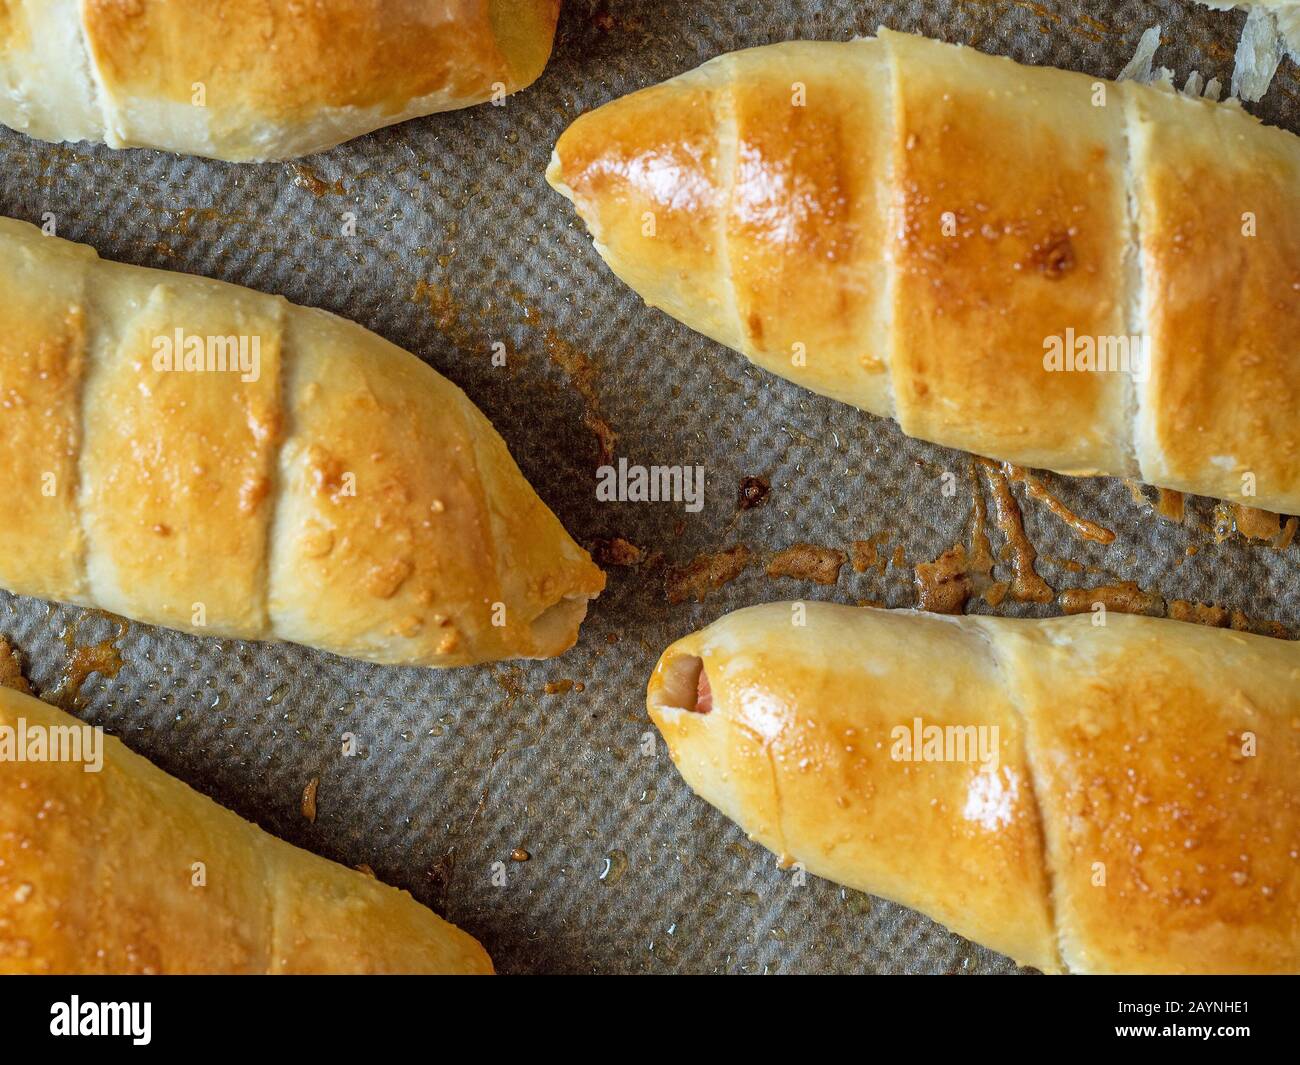 Top view of The finished juicy sausage in the dough. Close-up of flour products Stock Photo